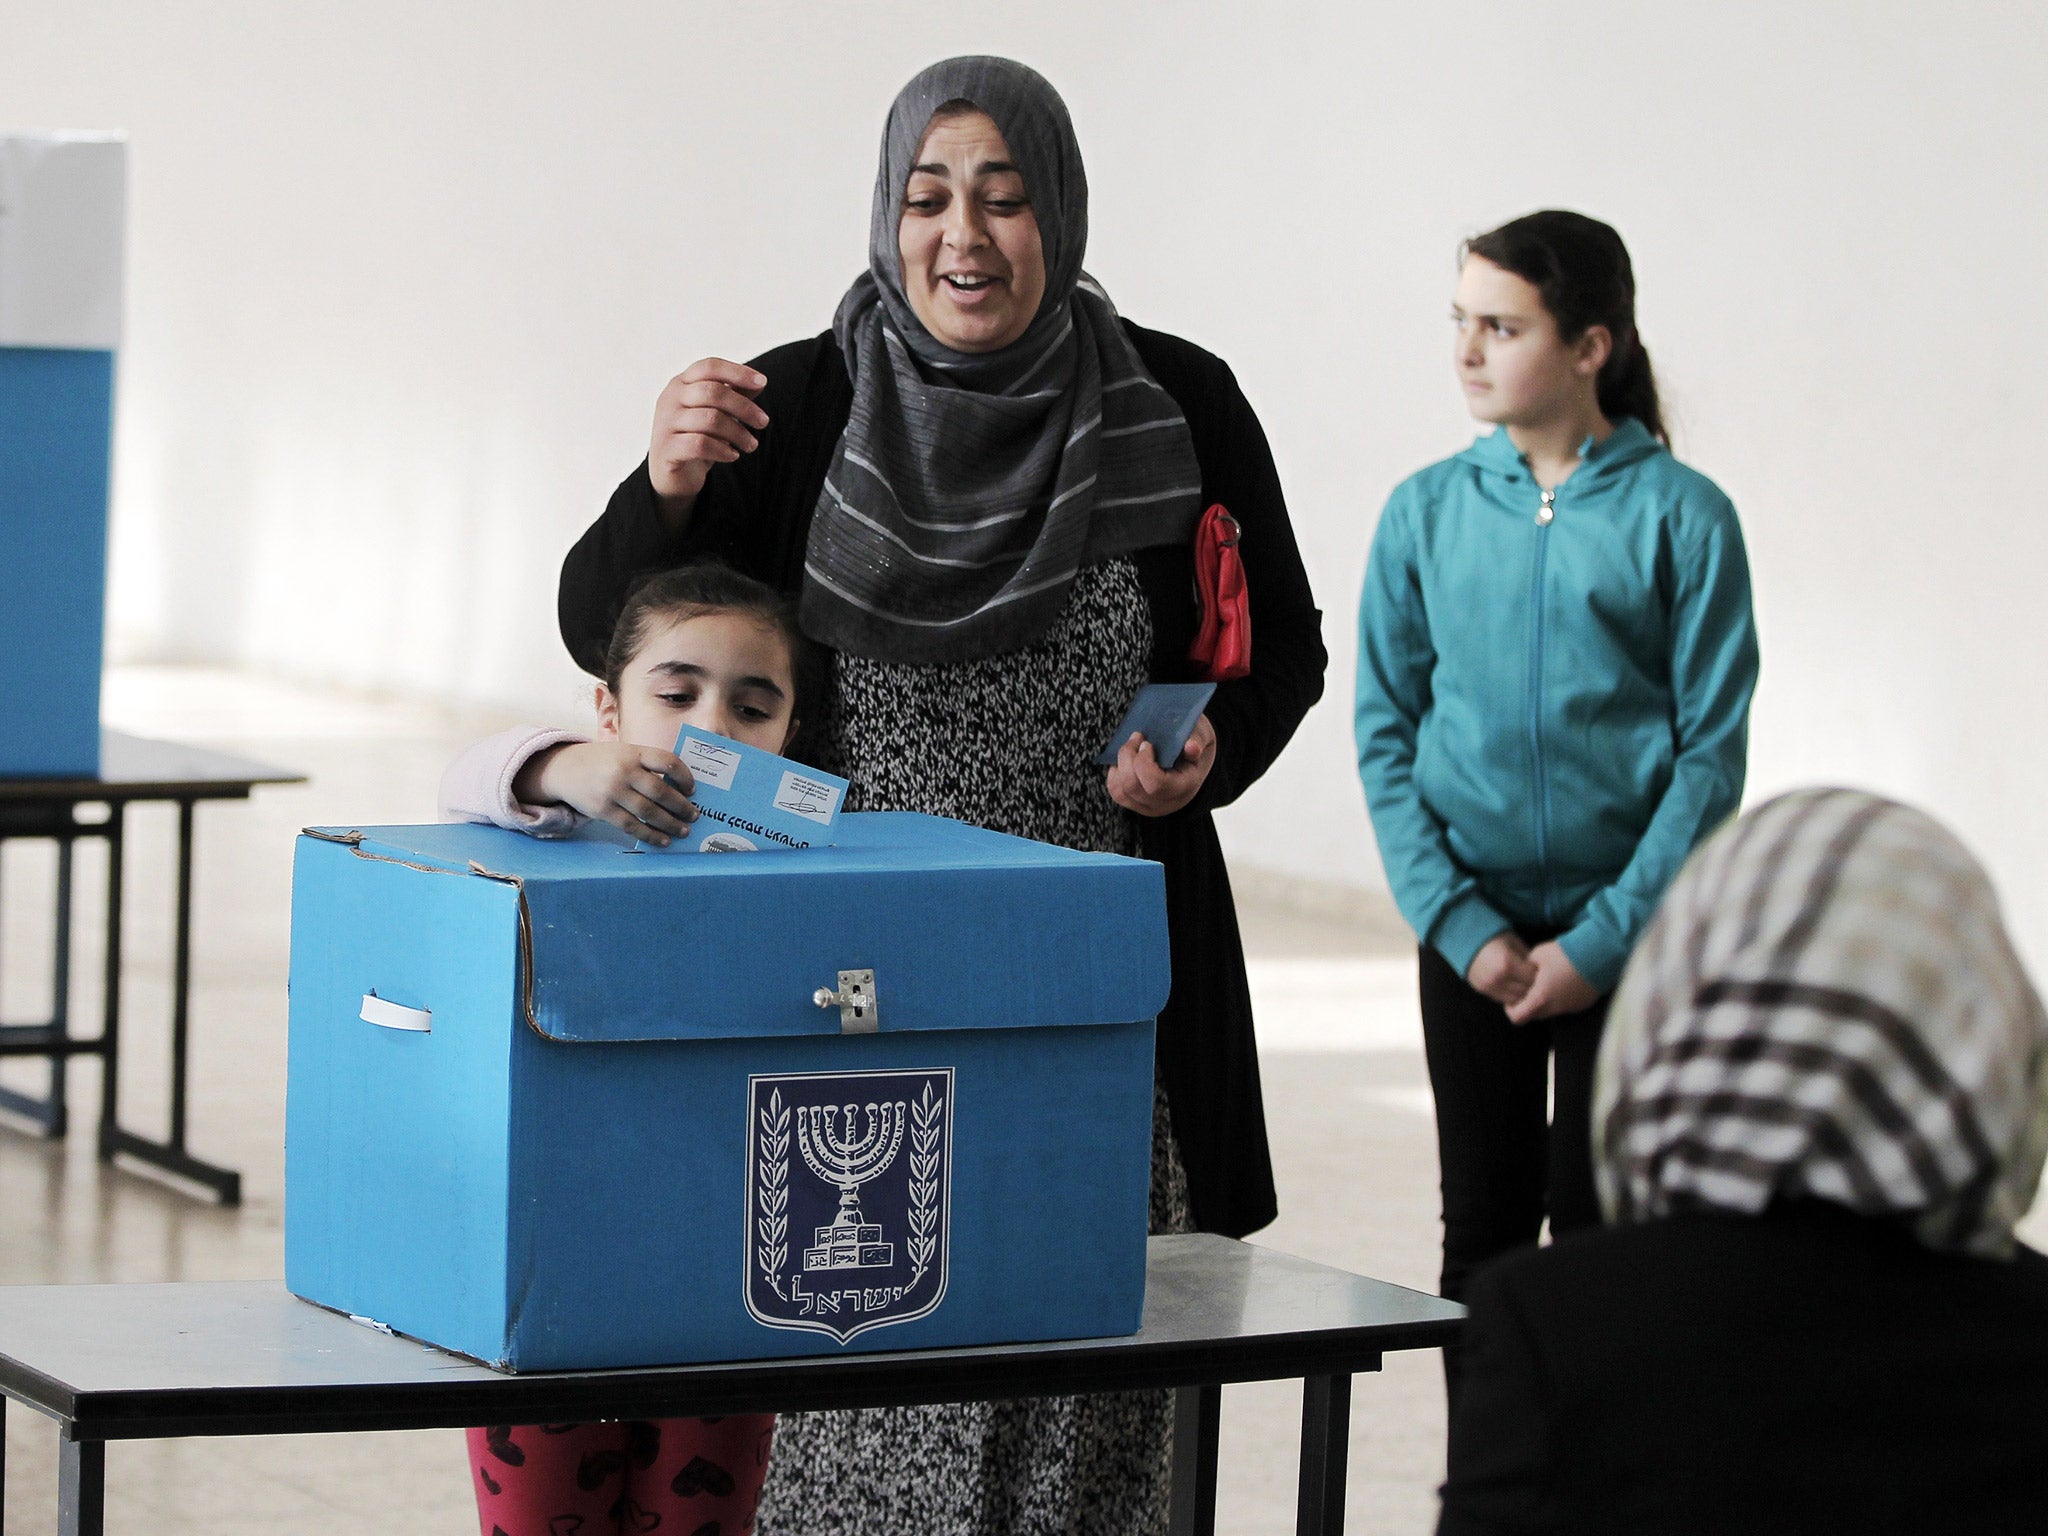 An Arab Israeli girl casts her mother's ballot at a polling station on Tuesday